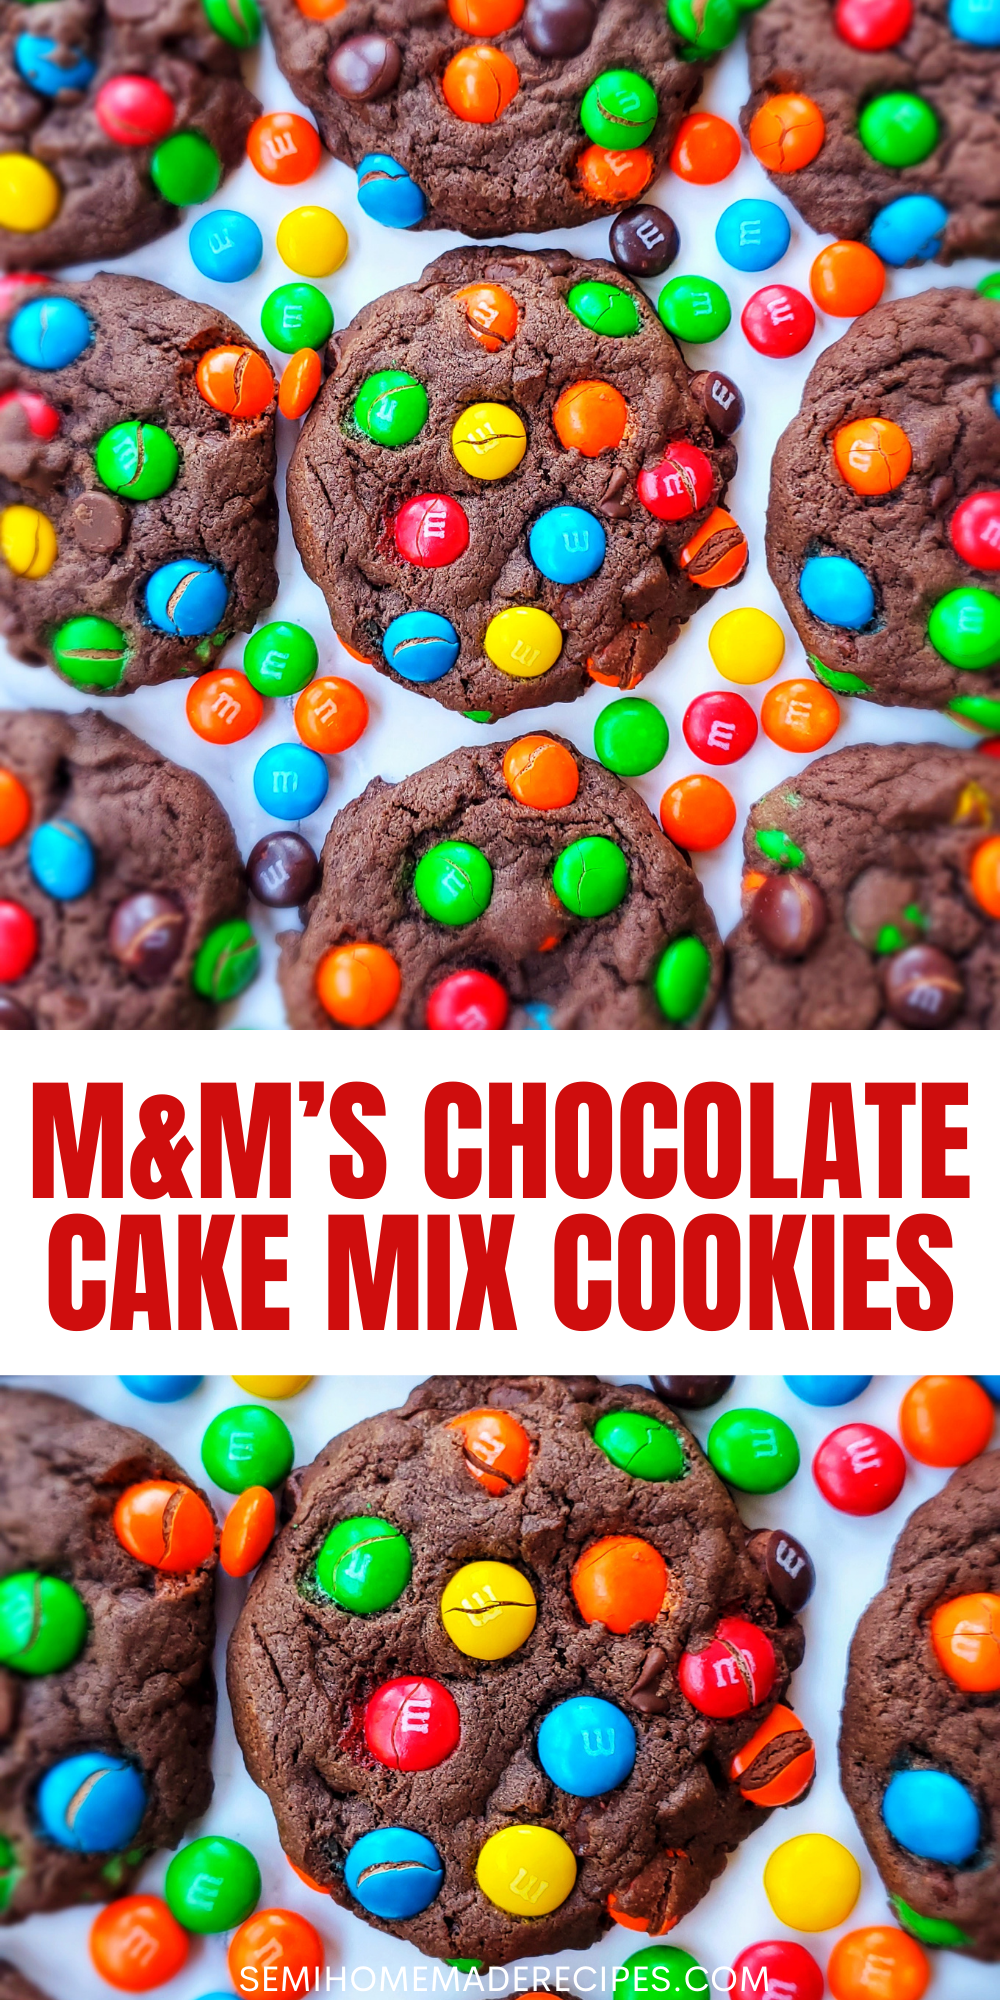 These easy M&M's Chocolate Cake Mix Cookies are made using chocolate cake mix, oil, eggs and colorful chocolate M&M candies!